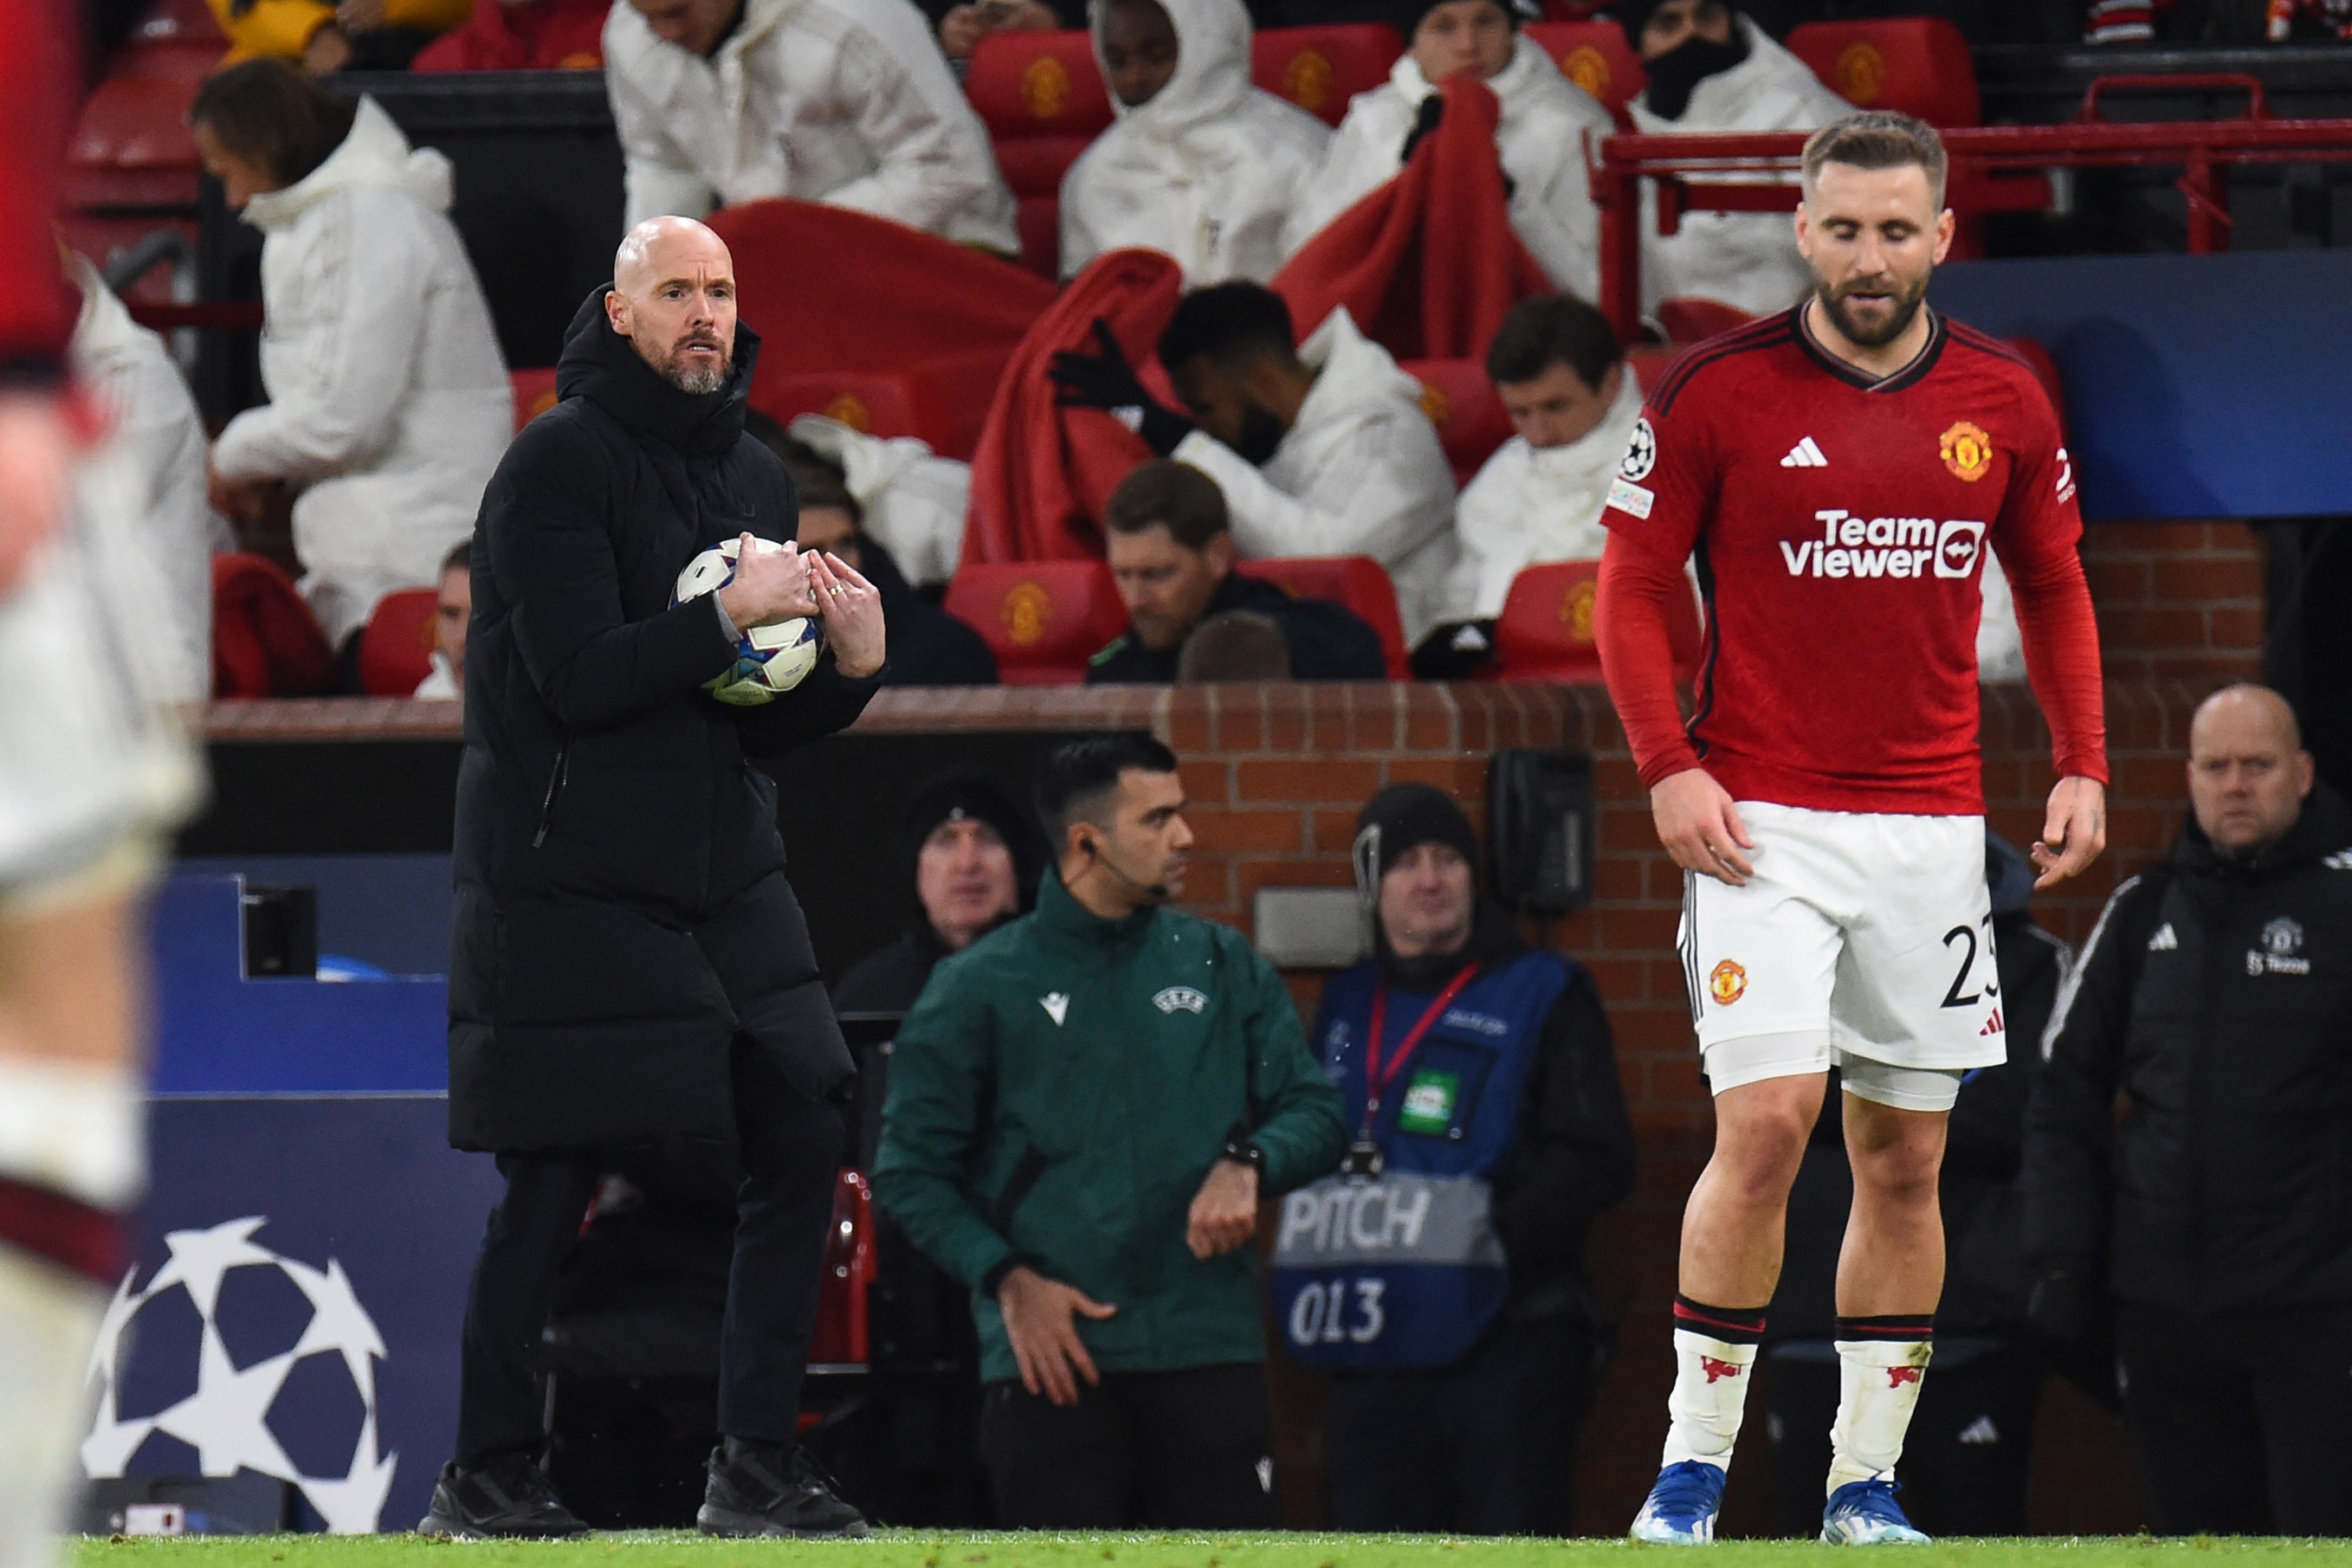 Manchester United face absentee crisis ahead of Liverpool visit after  Maguire & Shaw injuries - The Empire of The Kop